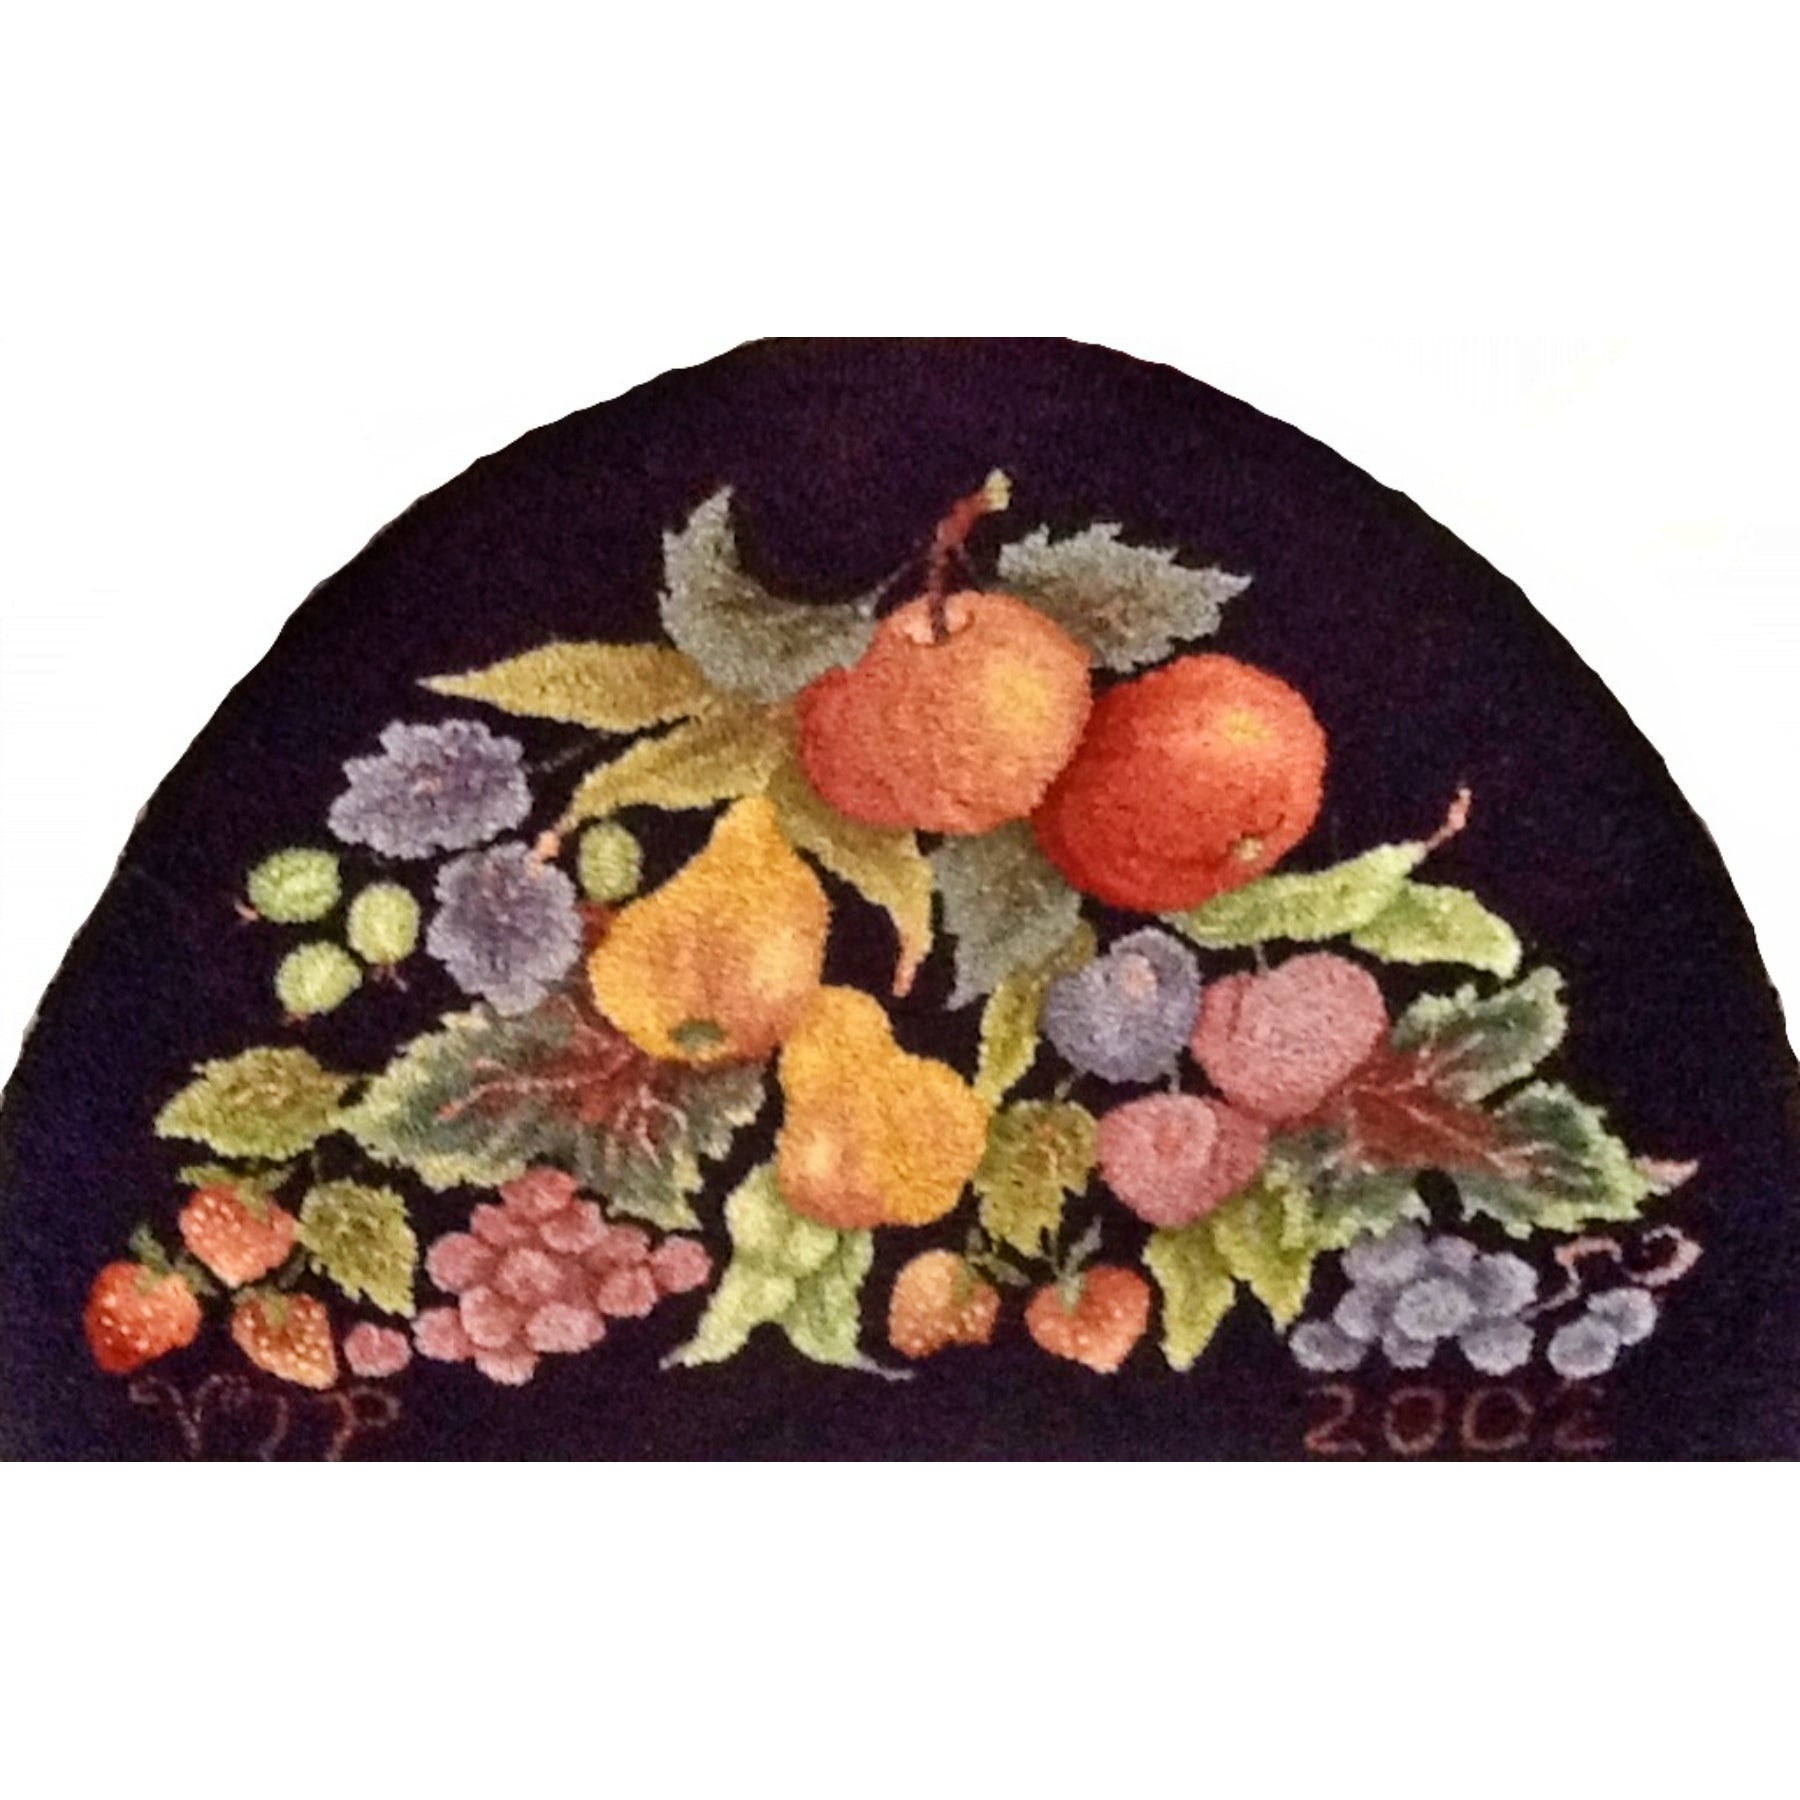 Small Fruit Half Rnd, rug hooked by Vivily Powers